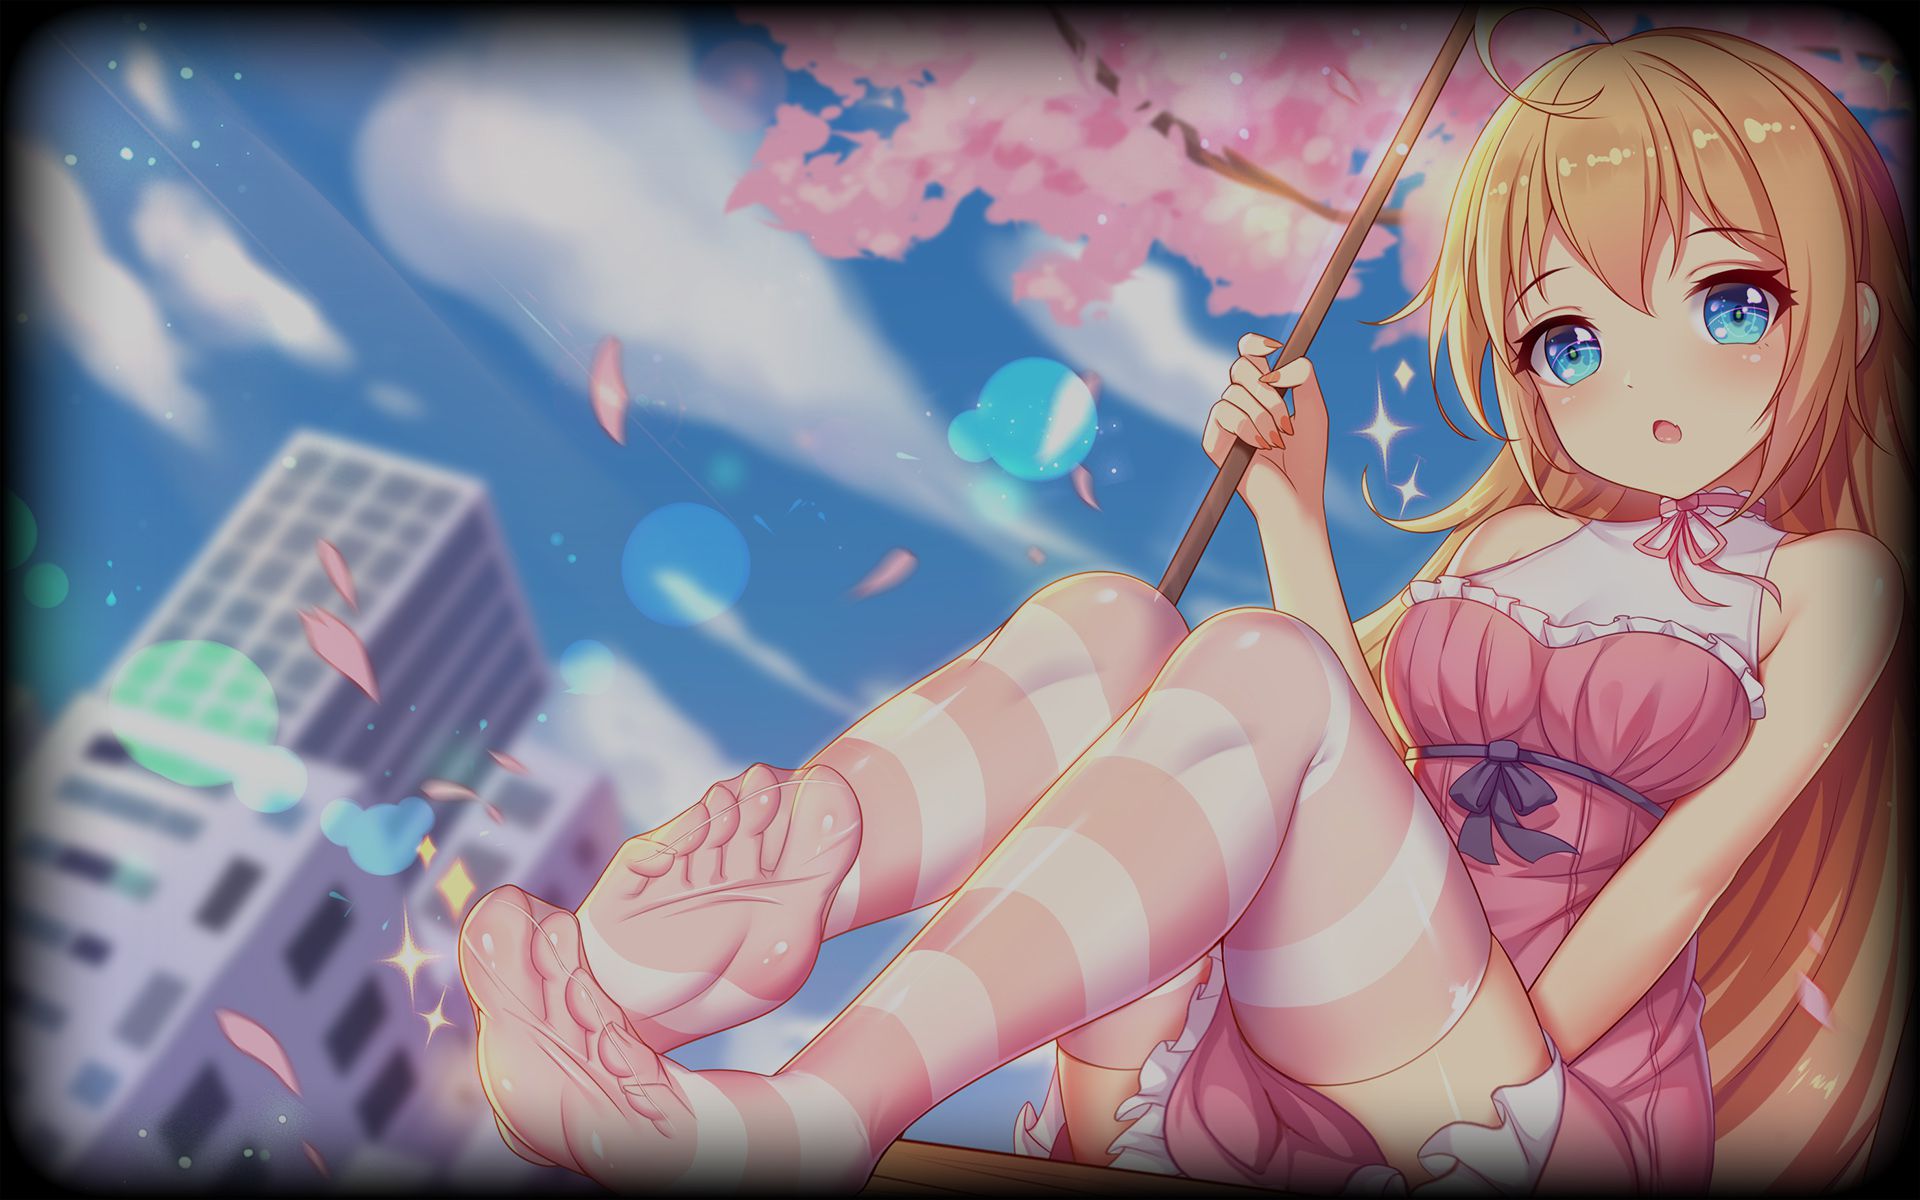 Steam Community Guide 婉婉之腿♀-背景图册/ Anime legs and thighhighs and feet backgrounds pic